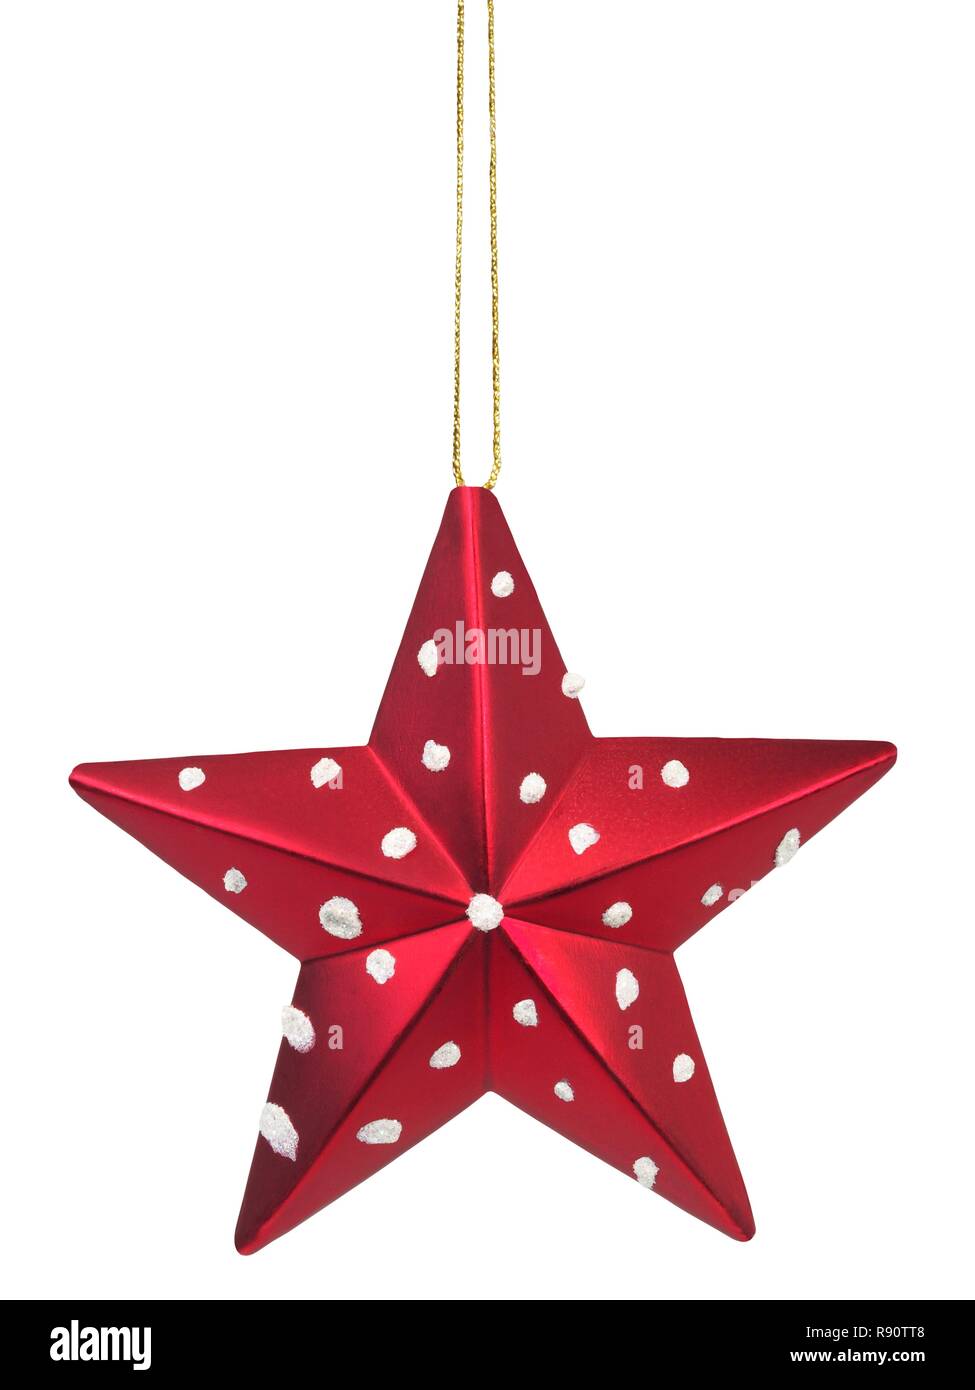 Red star as Christmas tree decoration isolated on white background Stock Photo